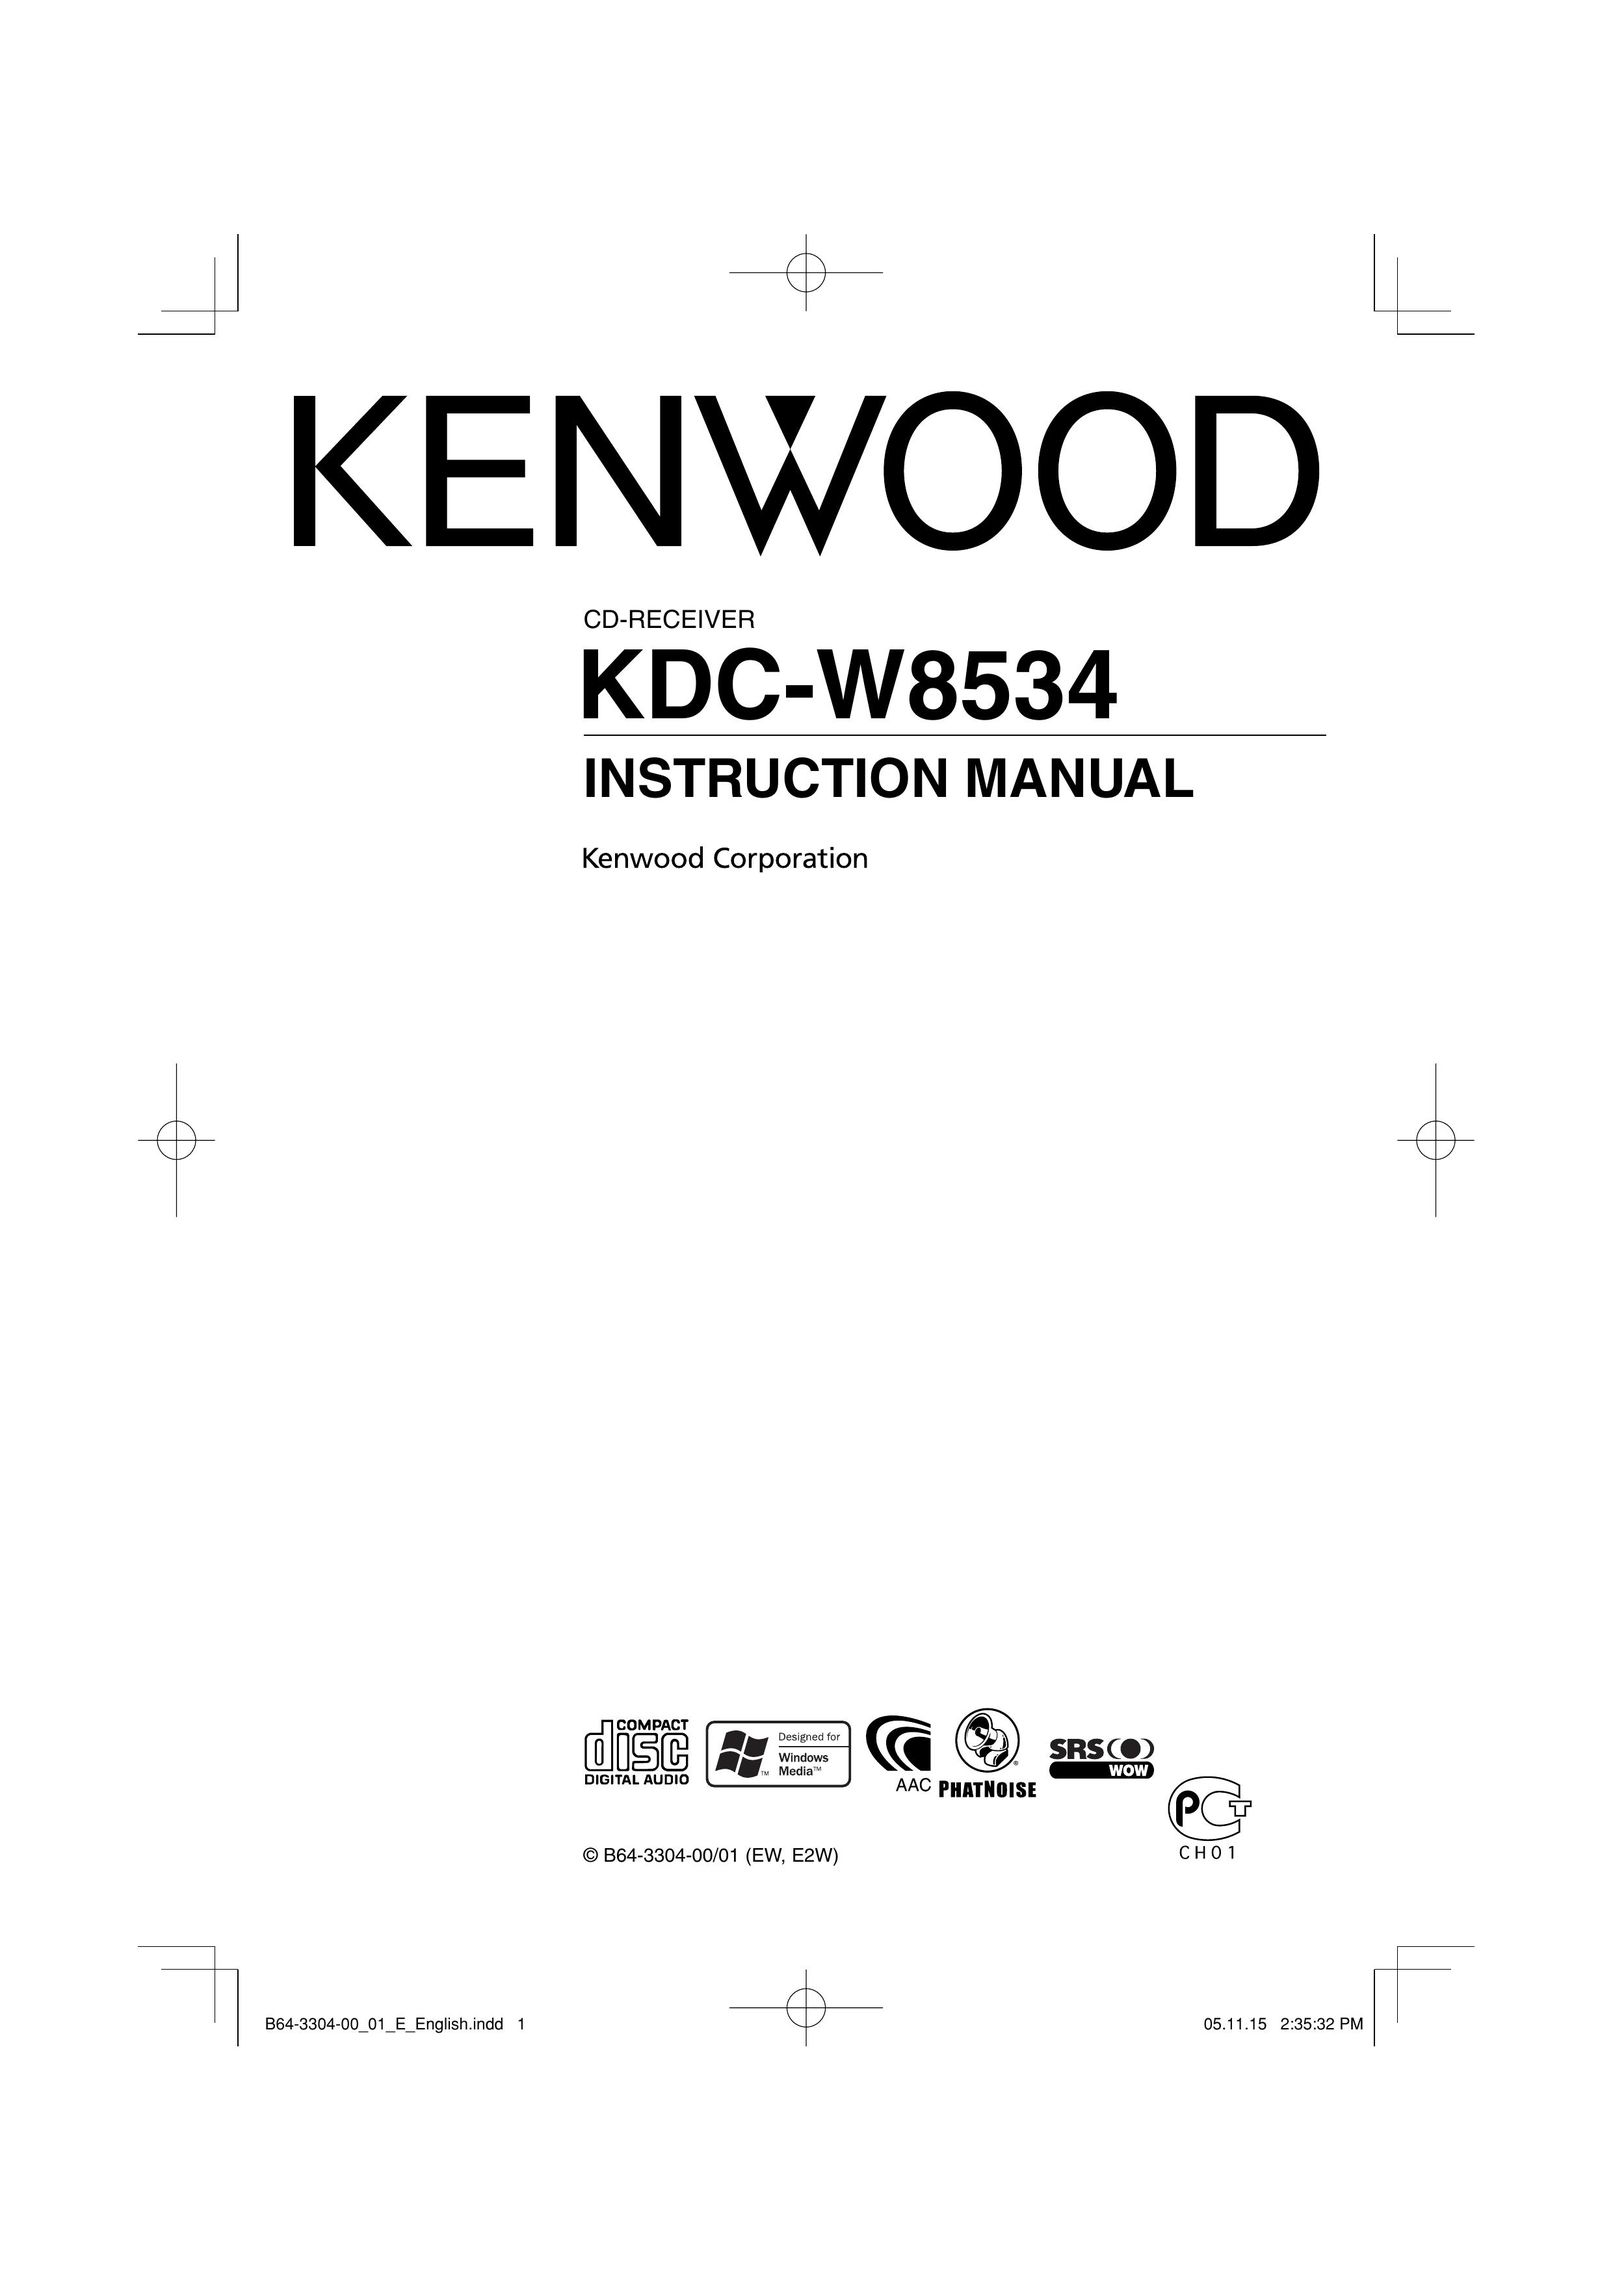 Dolby Laboratories KDC-W8534 Car Stereo System User Manual